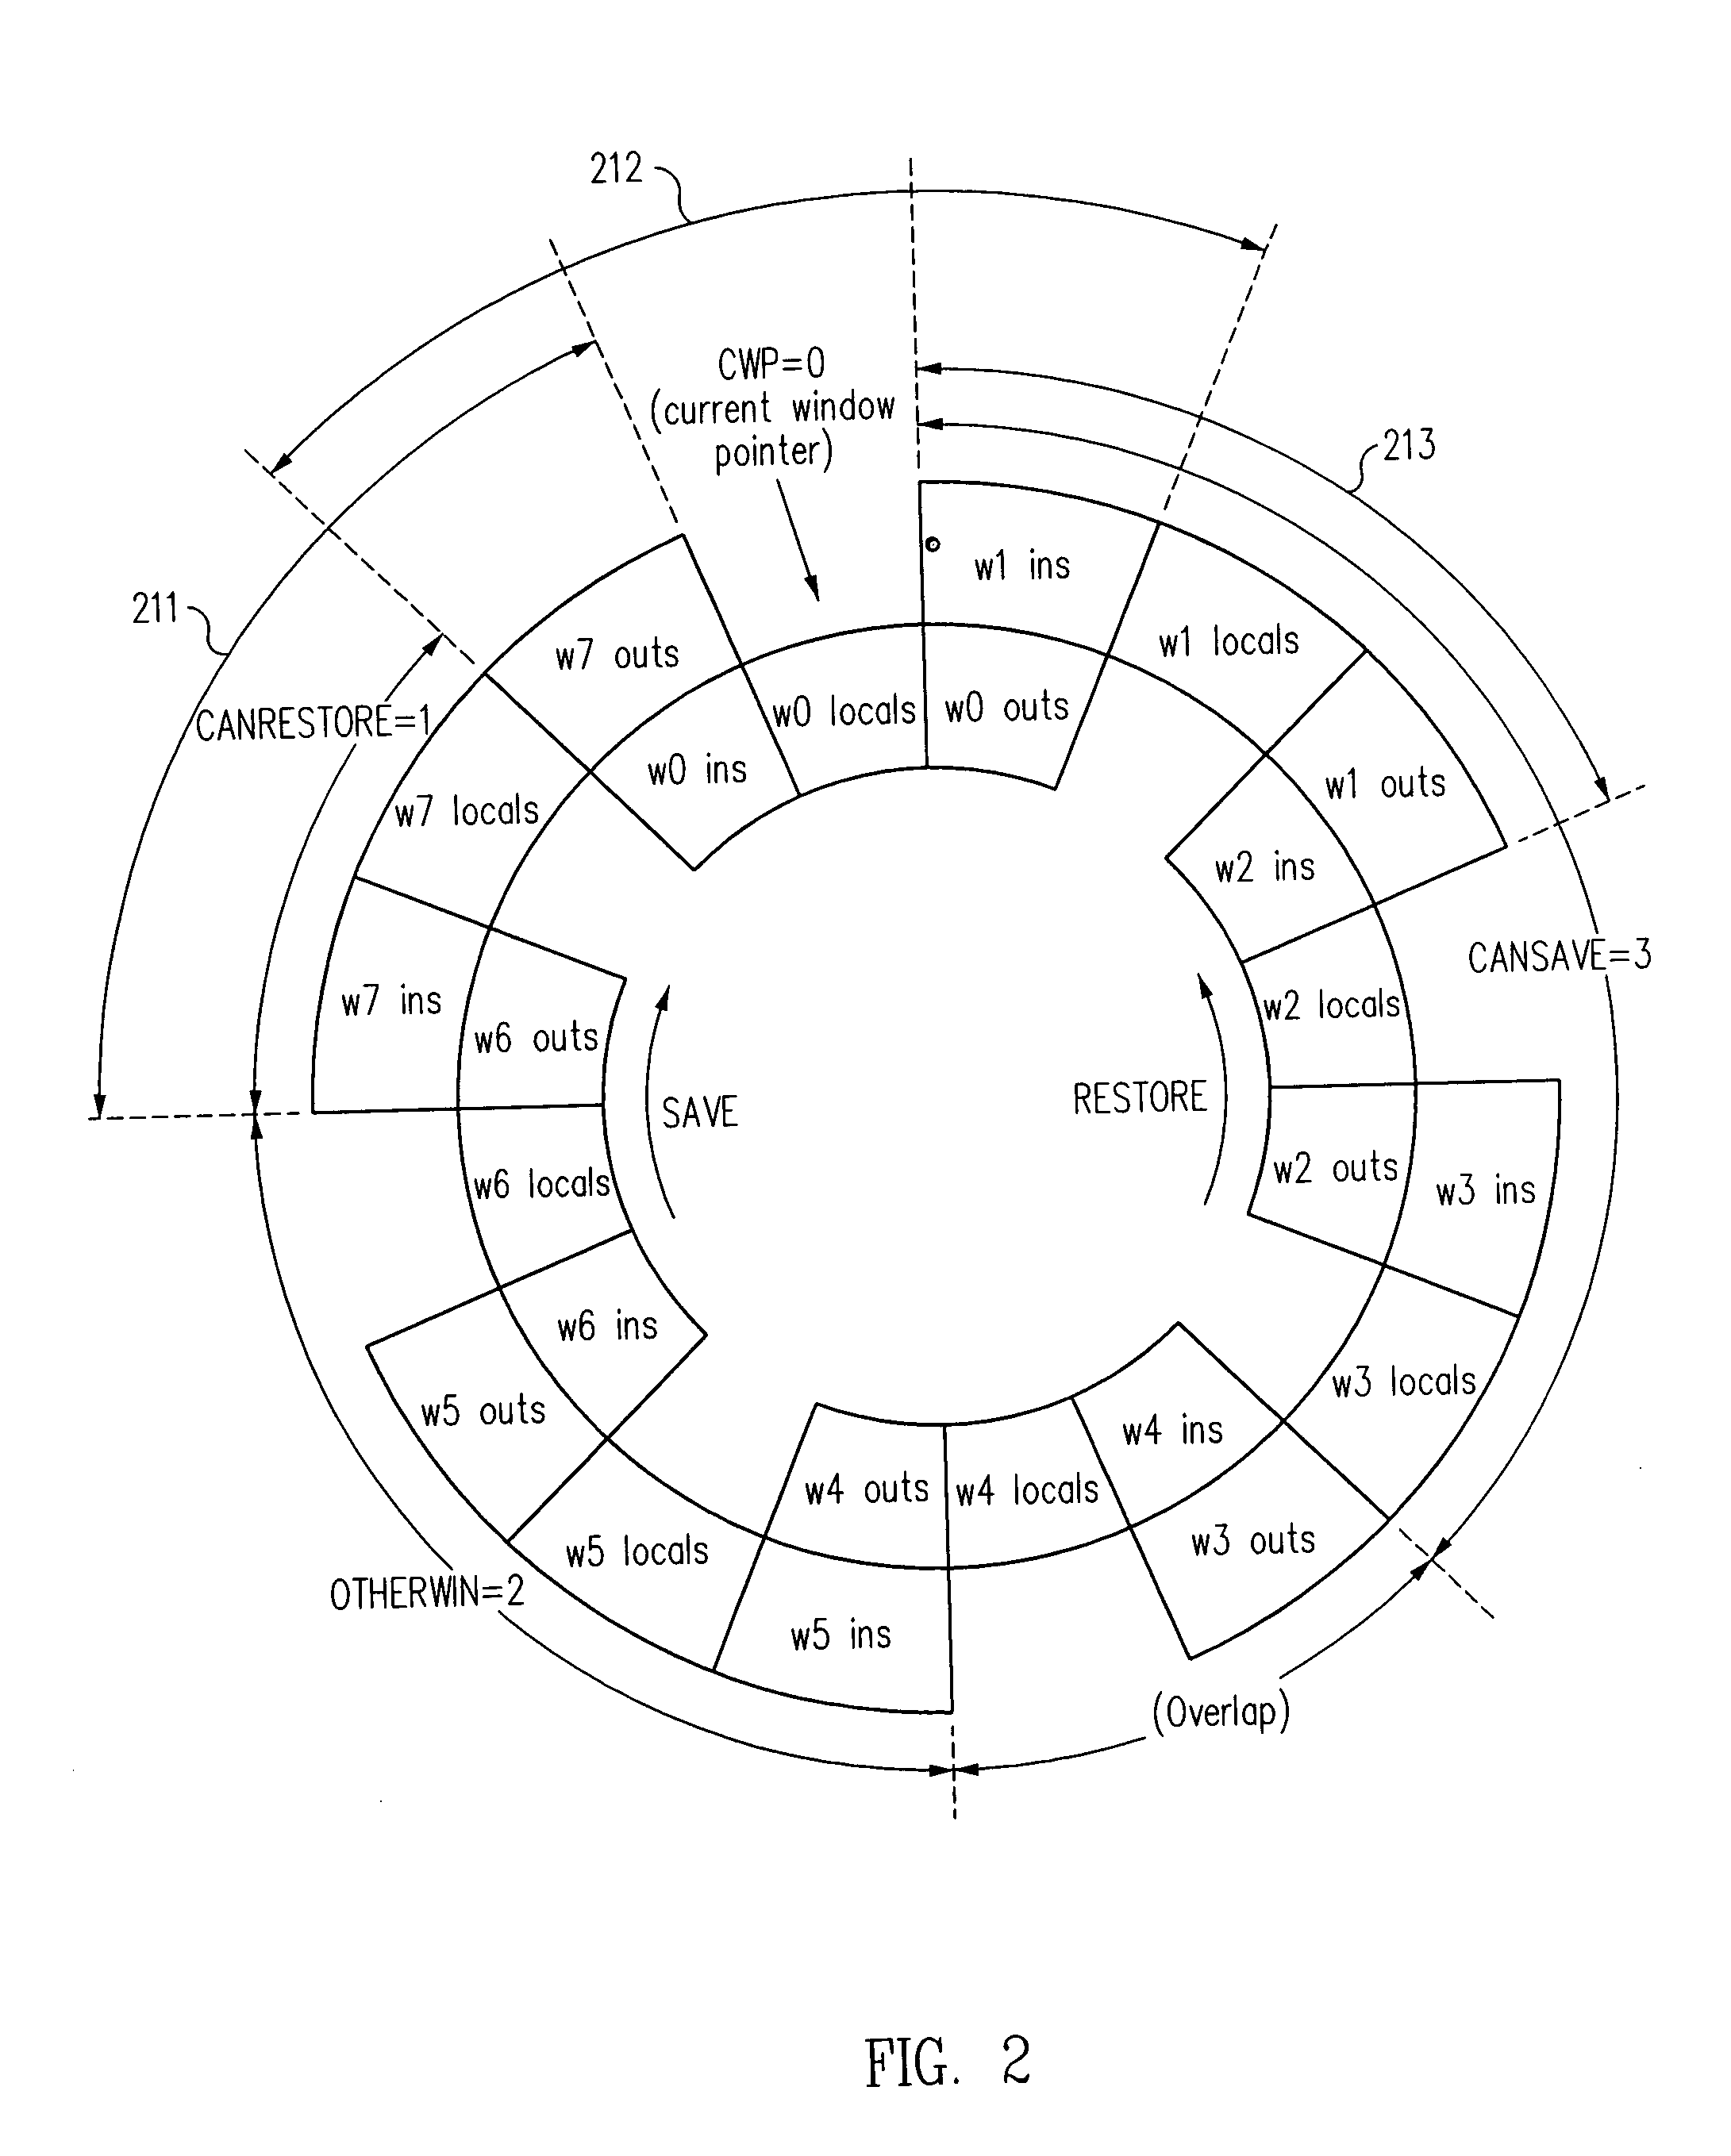 Thread suspension and method in a multi-threaded environment